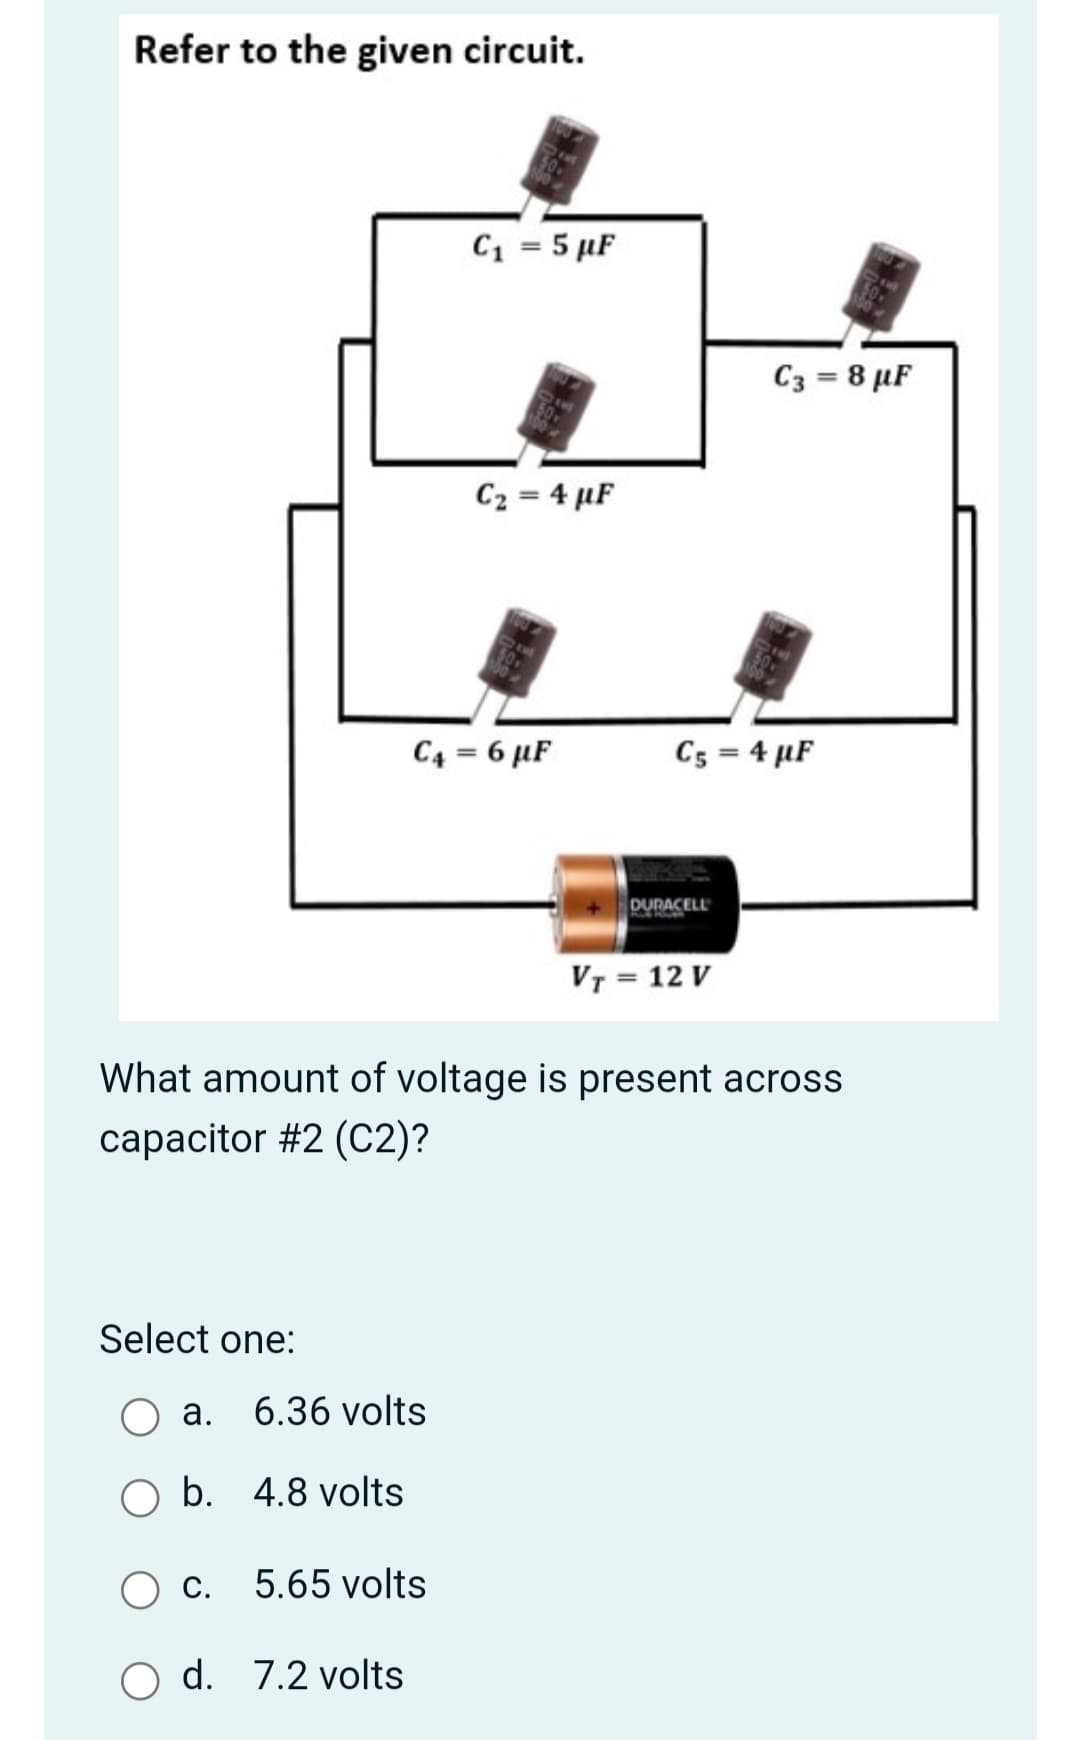 Refer to the given circuit.
C1 = 5 µF
C3 = 8 µF
C2 = 4 µF
C4 = 6 µF
C5 = 4 µF
DURACELL
Vr = 12 V
What amount of voltage is present across
capacitor #2 (C2)?
Select one:
а.
6.36 volts
O b. 4.8 volts
С.
5.65 volts
O d. 7.2 volts
